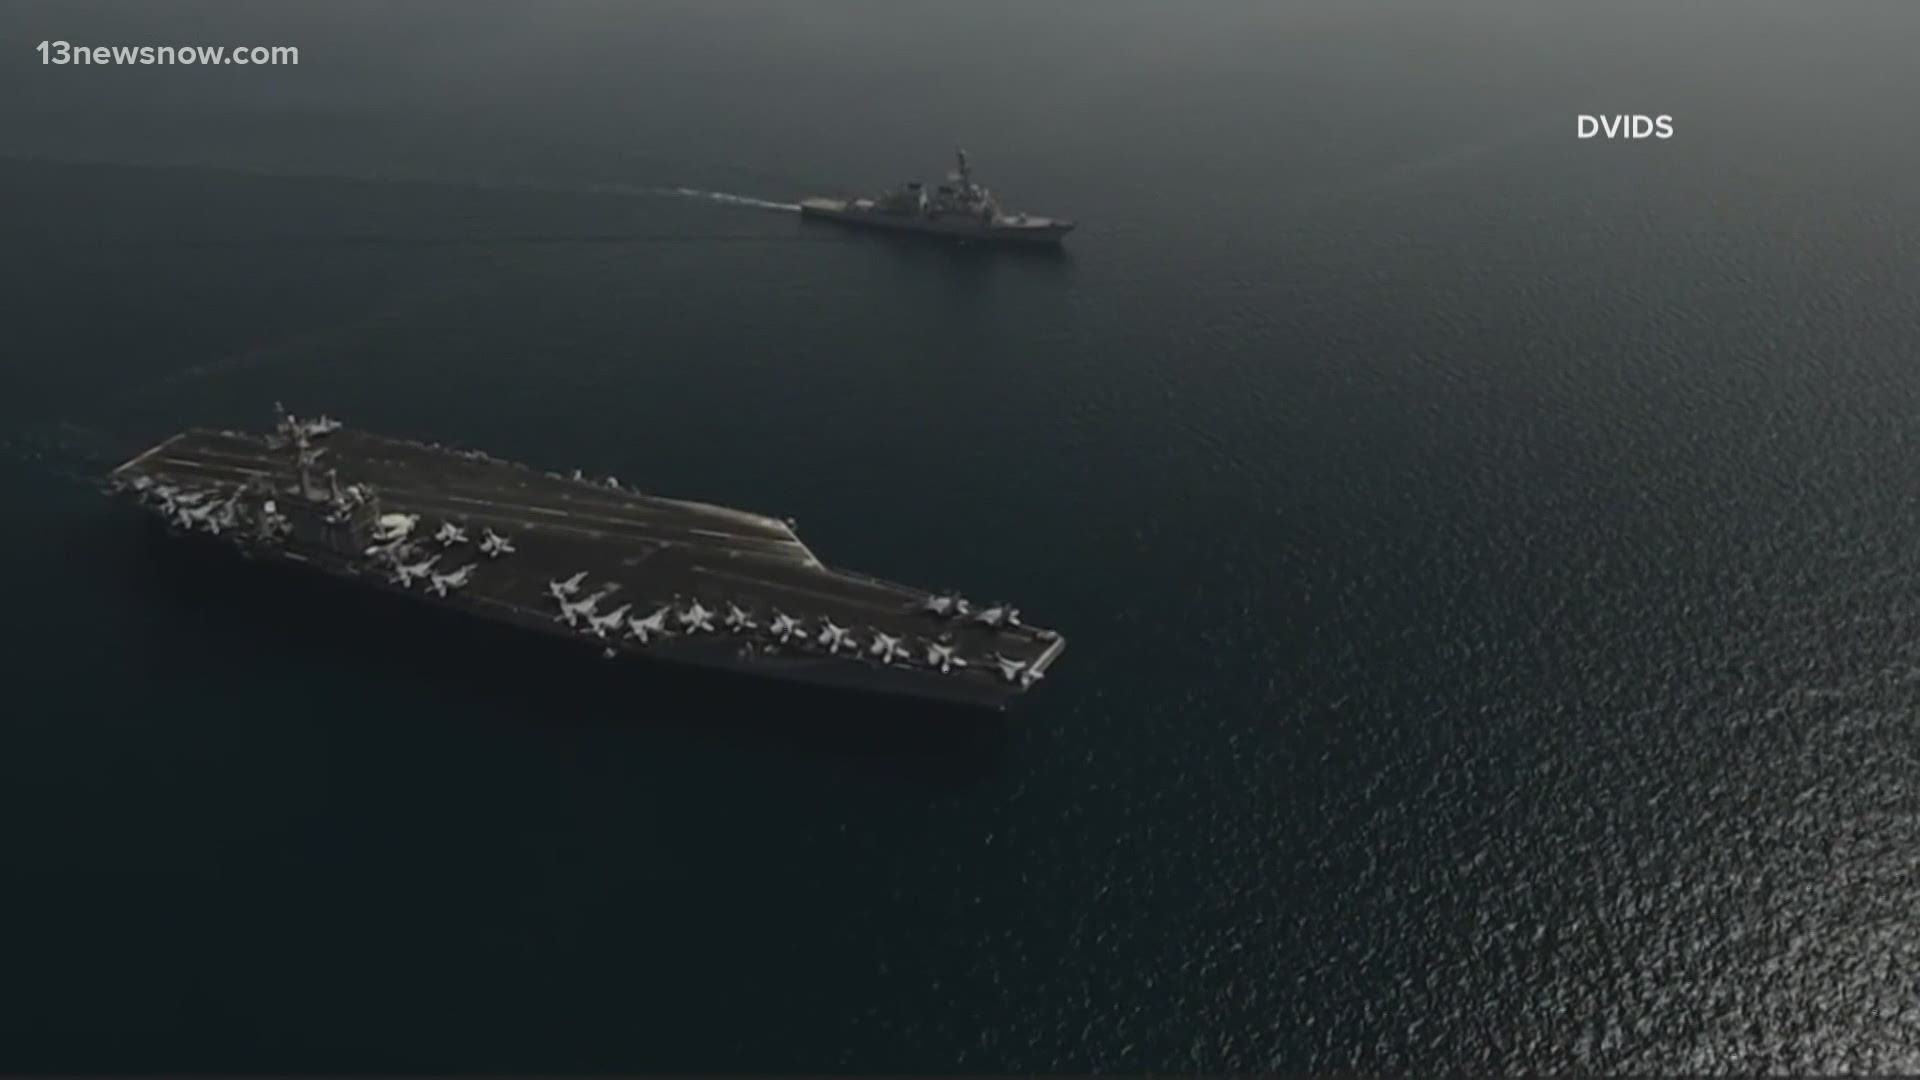 A GAO report says Naval readiness has decreased, thanks to high operational tempo.